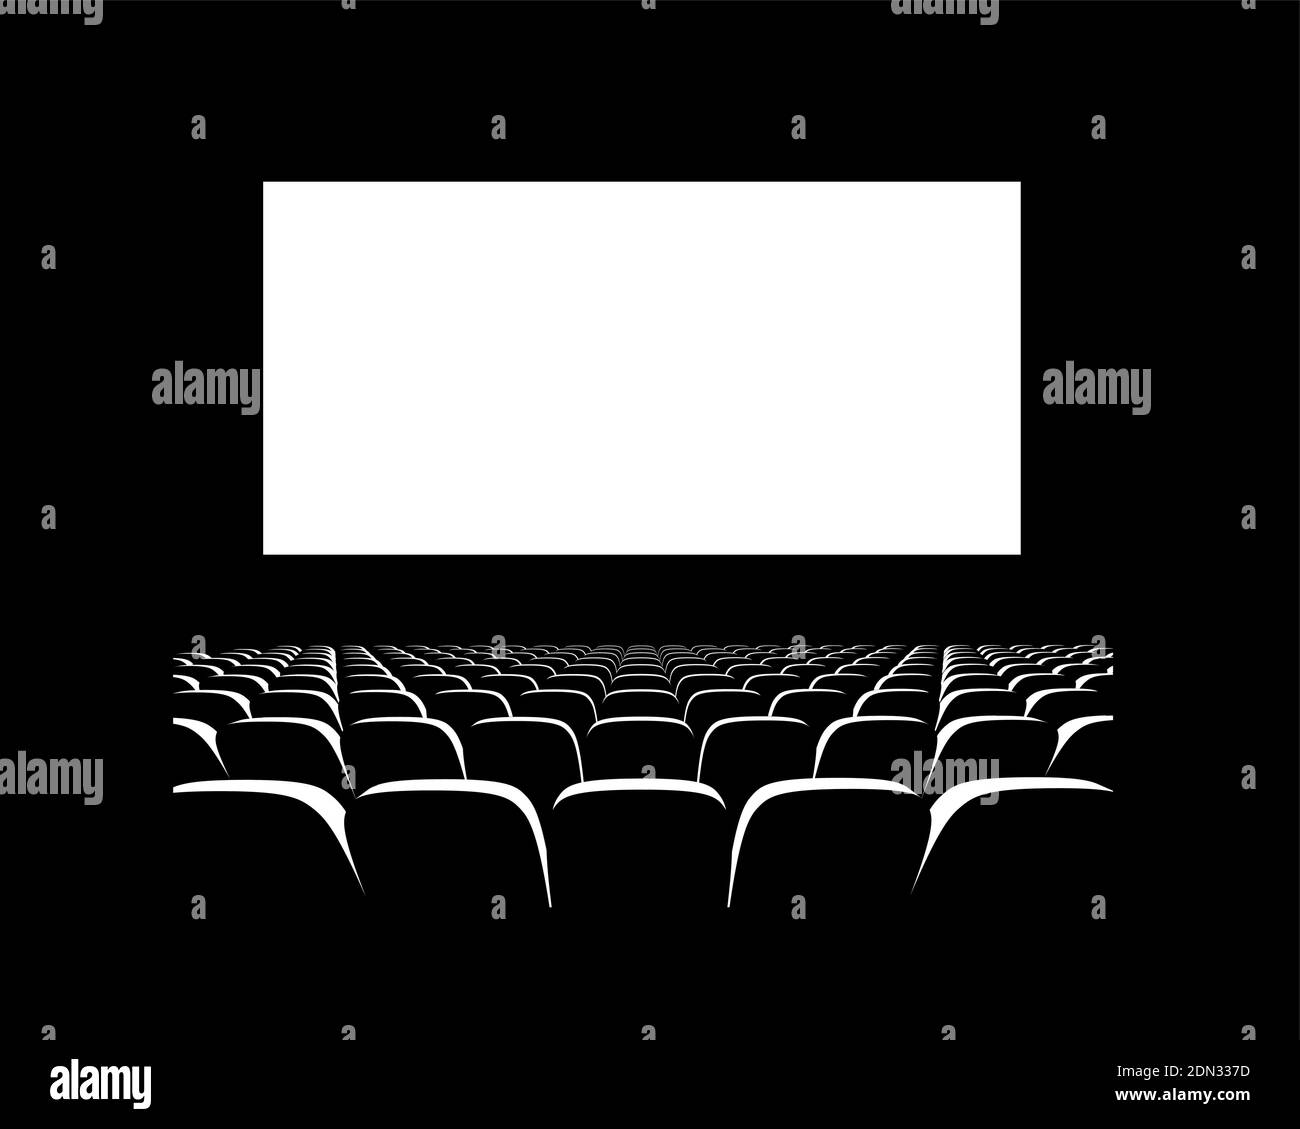 Hall for watching movies. Cinema. Concert hall. Vector 3d illustration on dark background Stock Vector